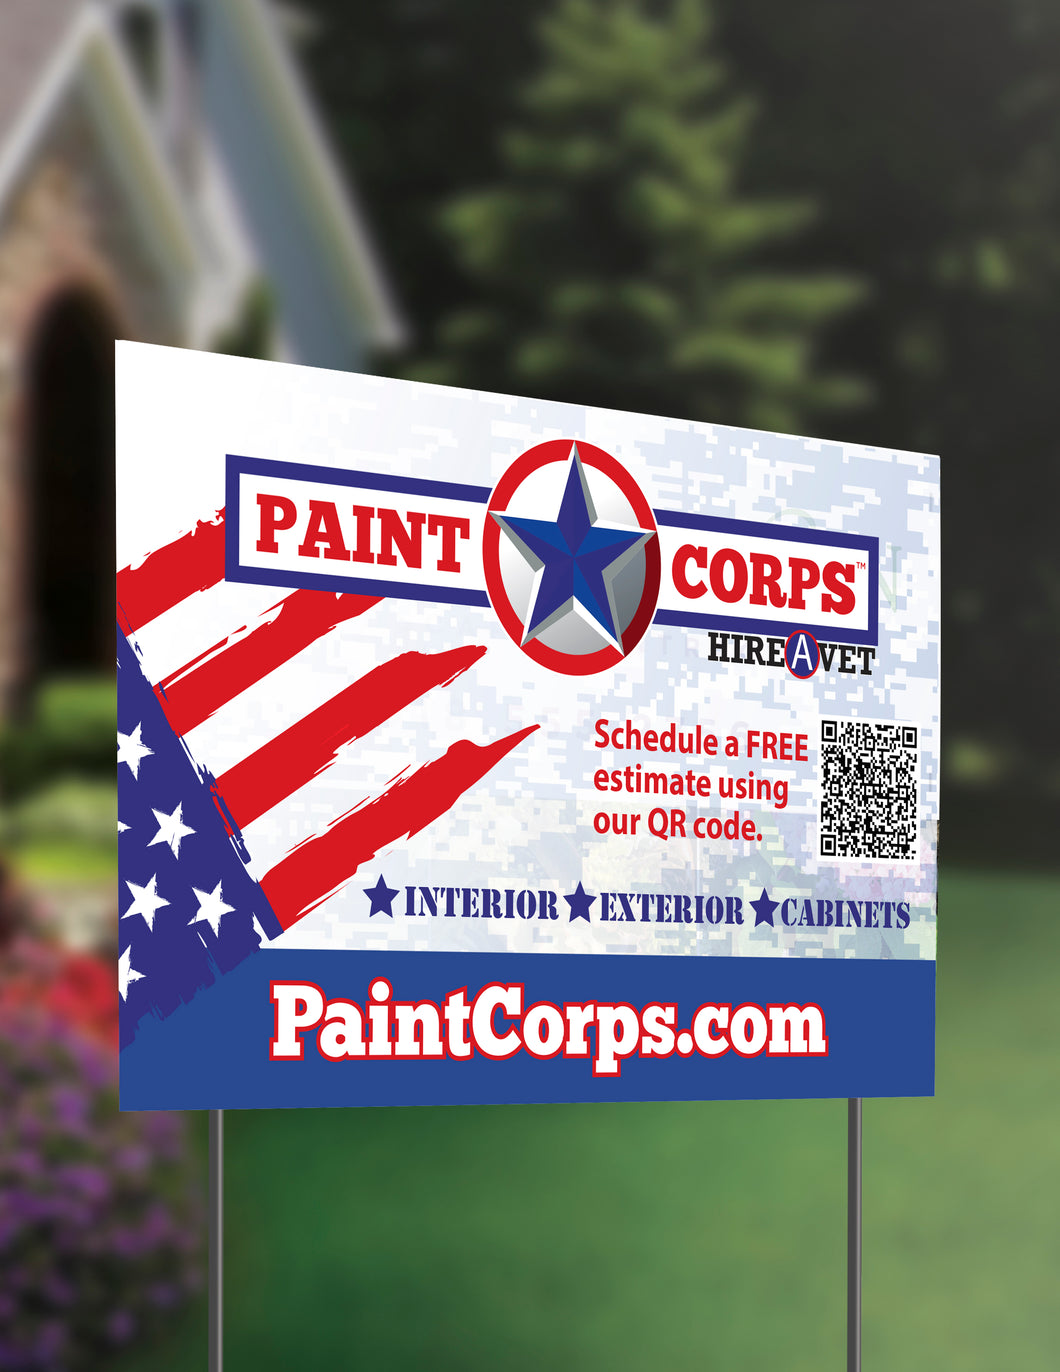 Paint Corps 12 x 18 Yard Signs with stand